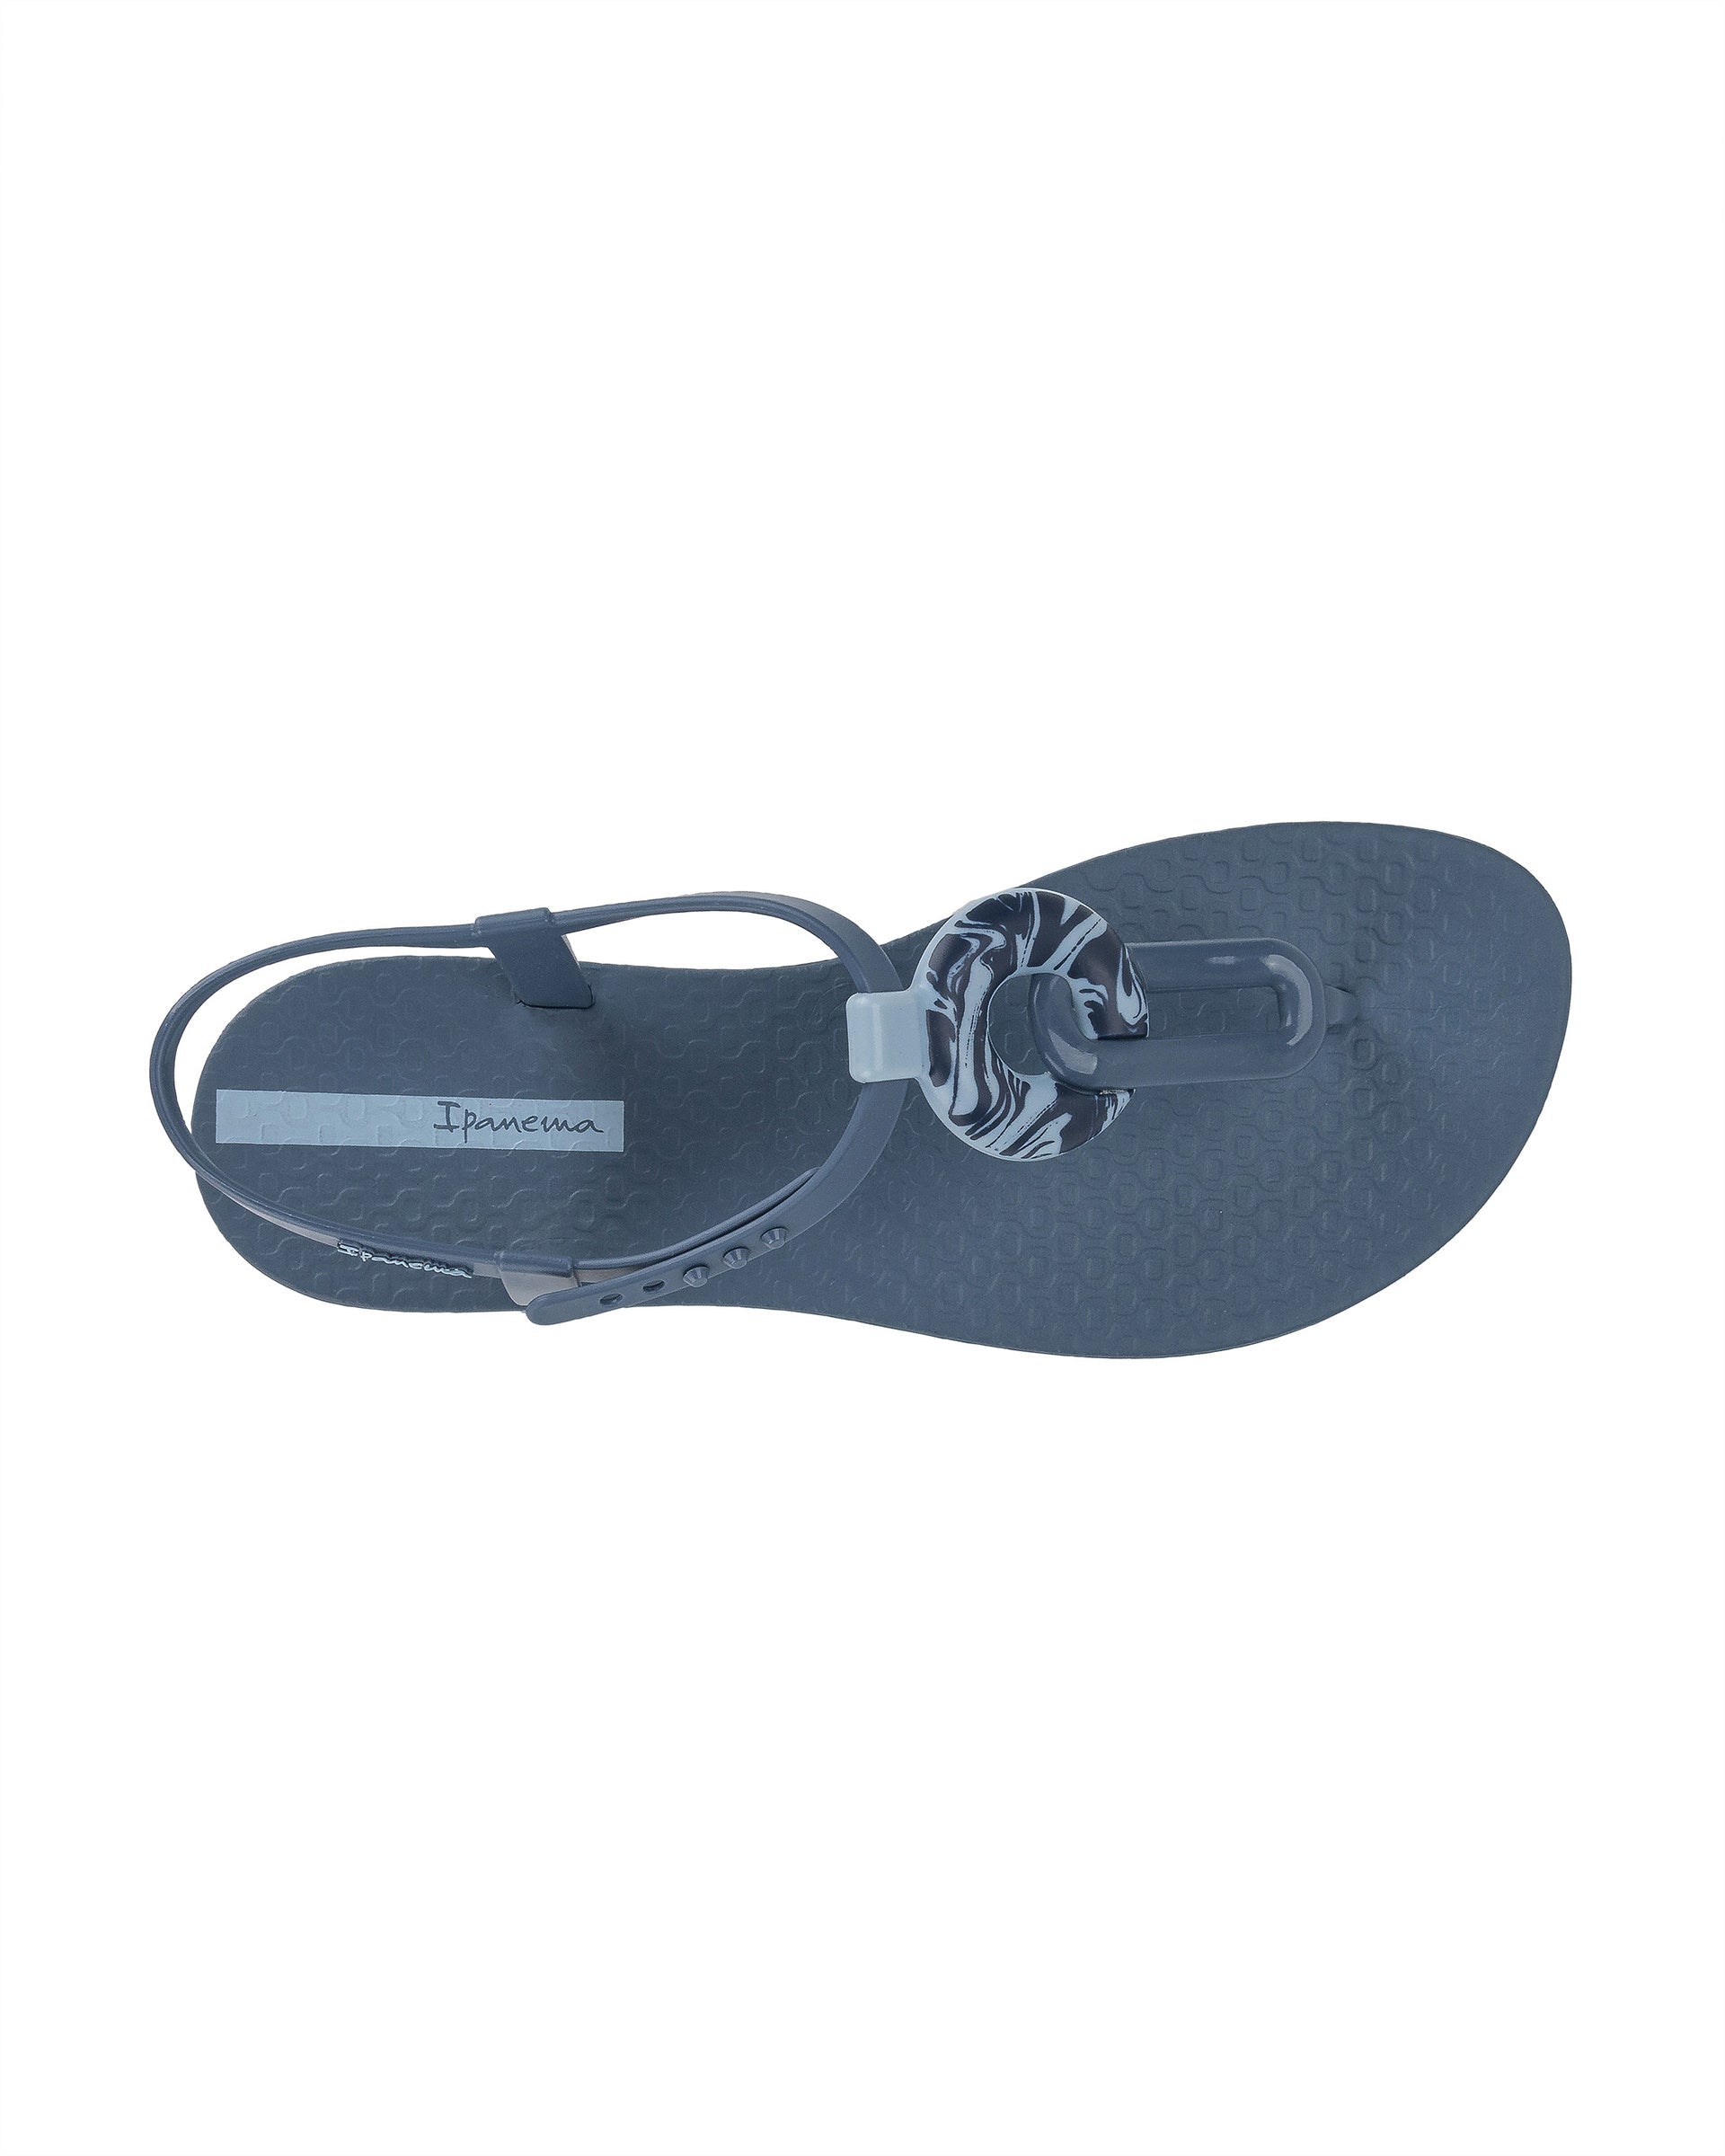 Top view of a blue Ipanema Class Marble women's t-strap sandal.